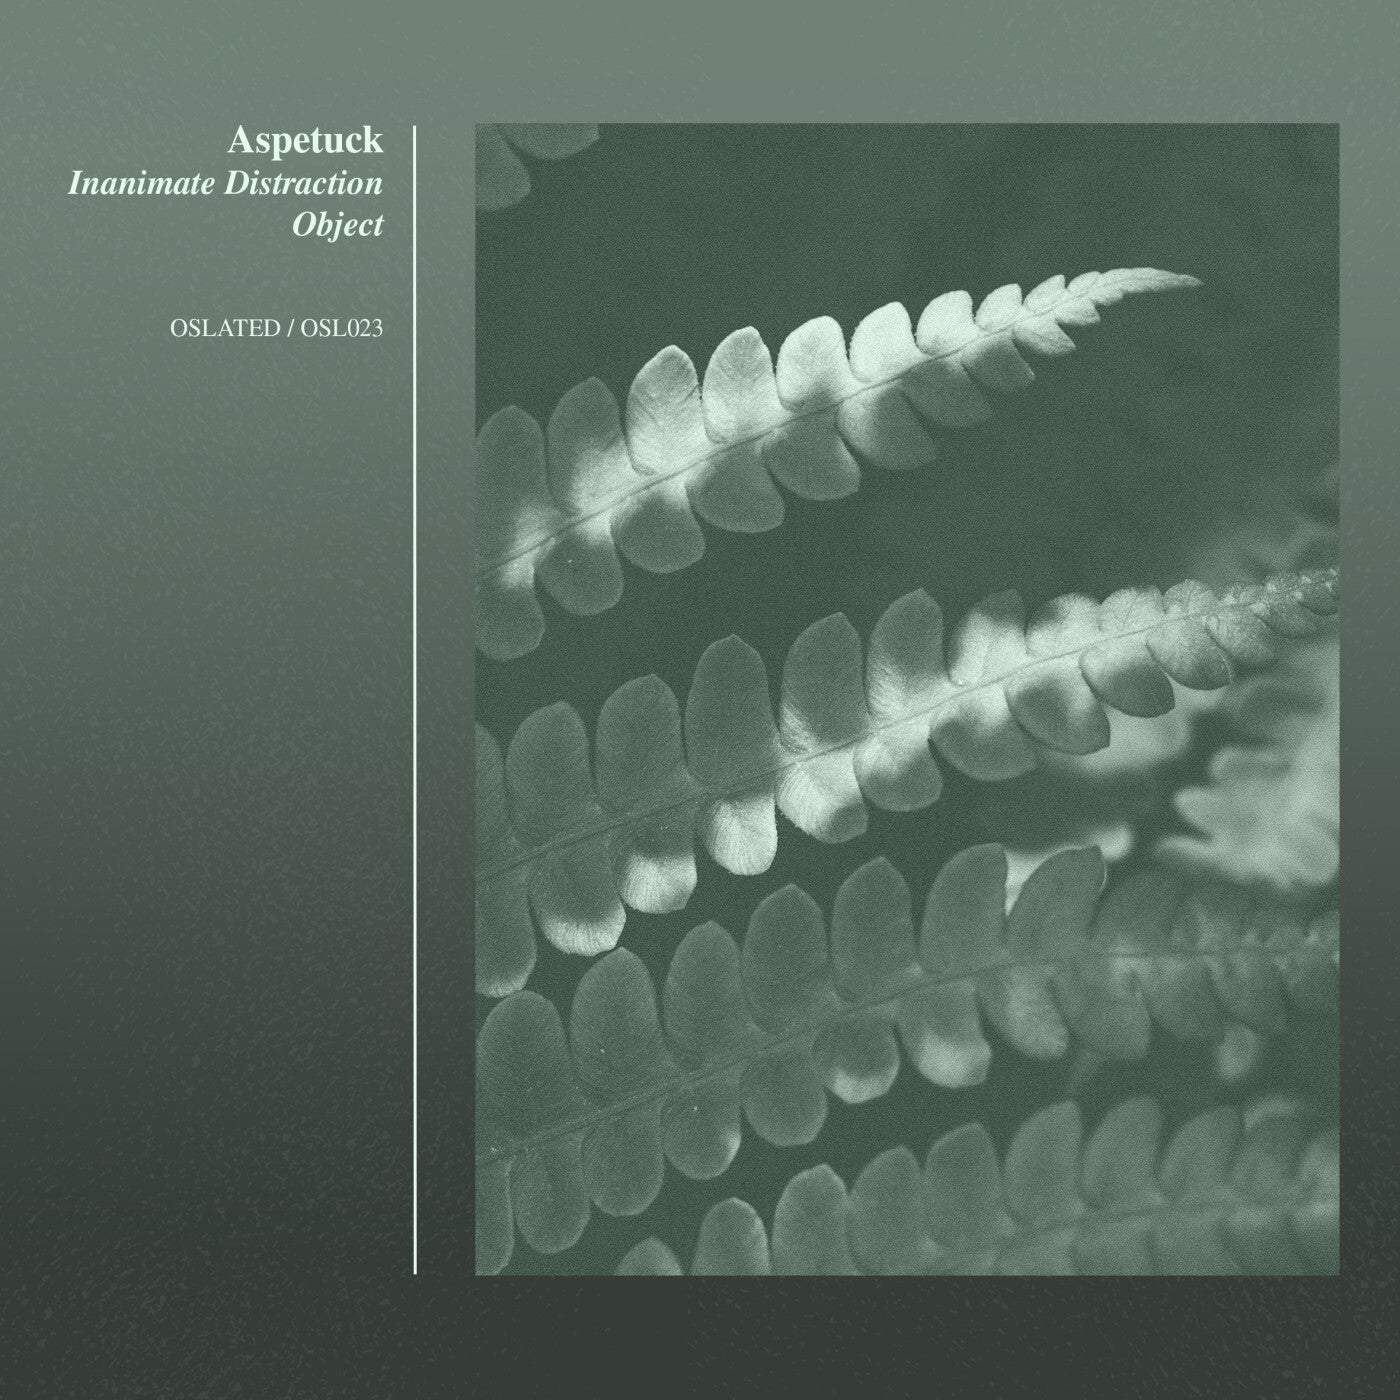 Download Aspetuck - Inanimate Distraction Object on Electrobuzz